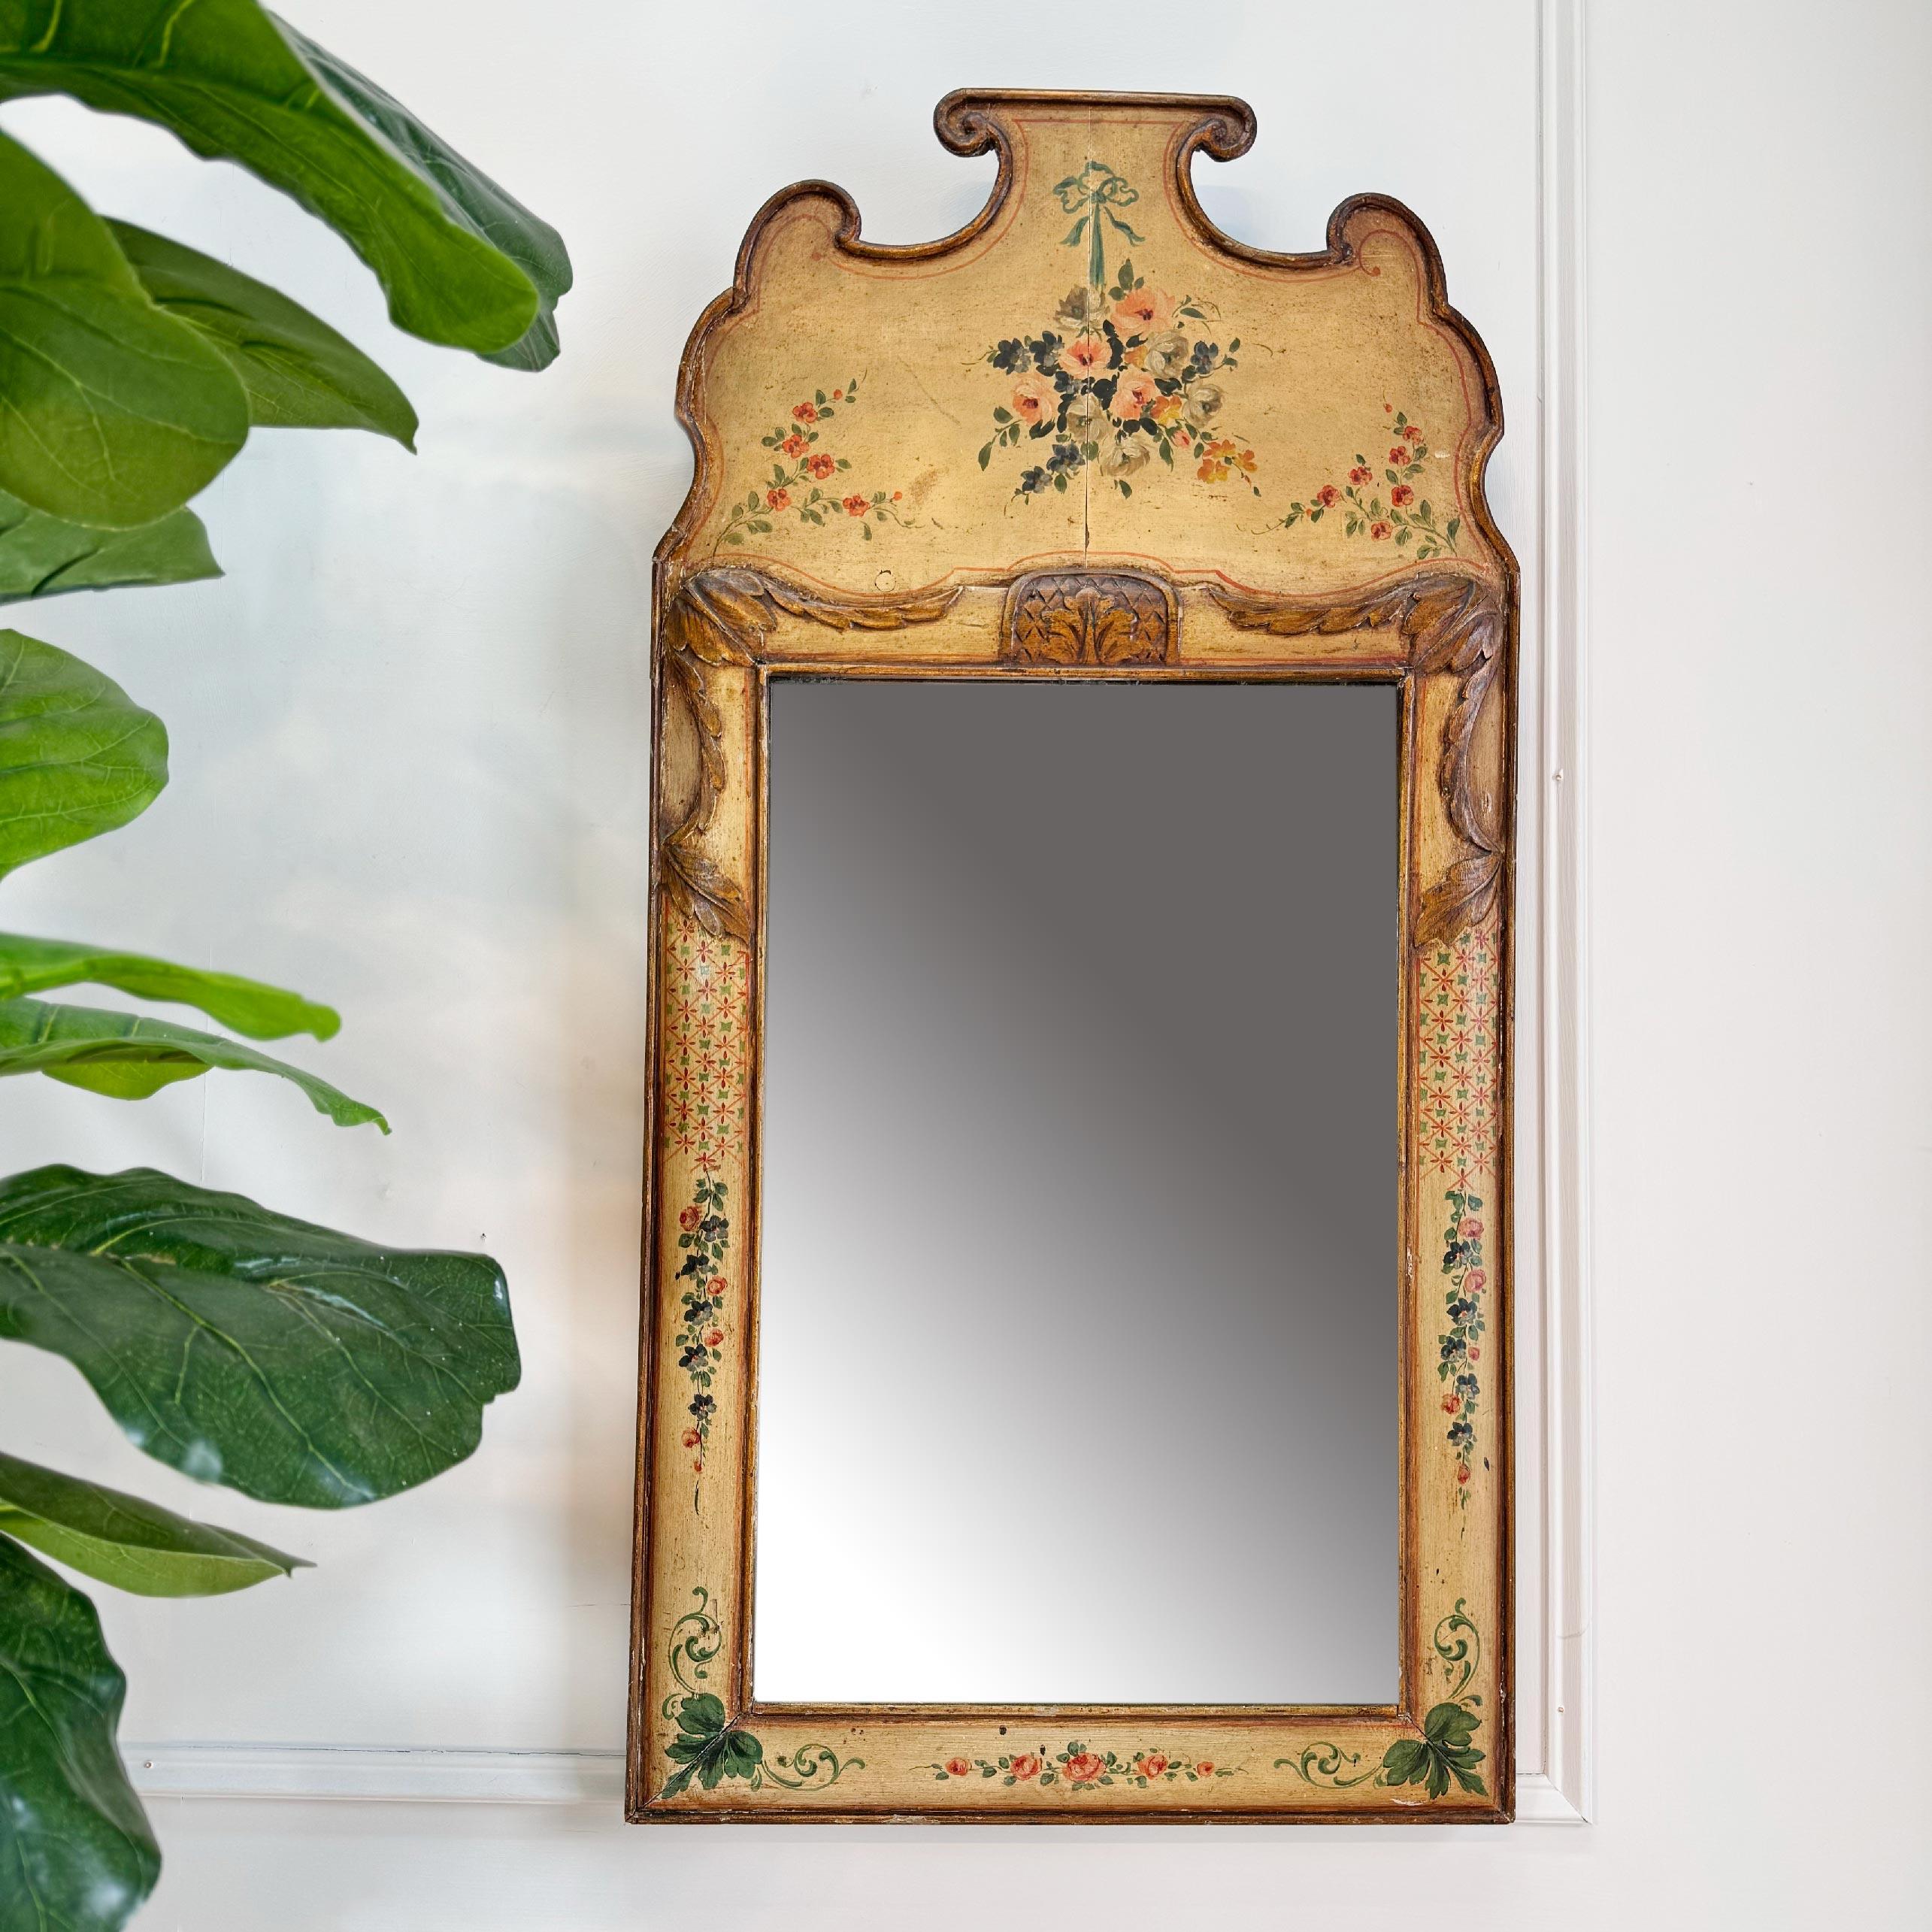 A beautiful late 18th century mirror in the Queen Anne manner, gilt over gesso flourishes and hand painted decorative elements of flowers and leaves on a soft yellow  background.



This is an absolutely beautiful mirror and retains its original